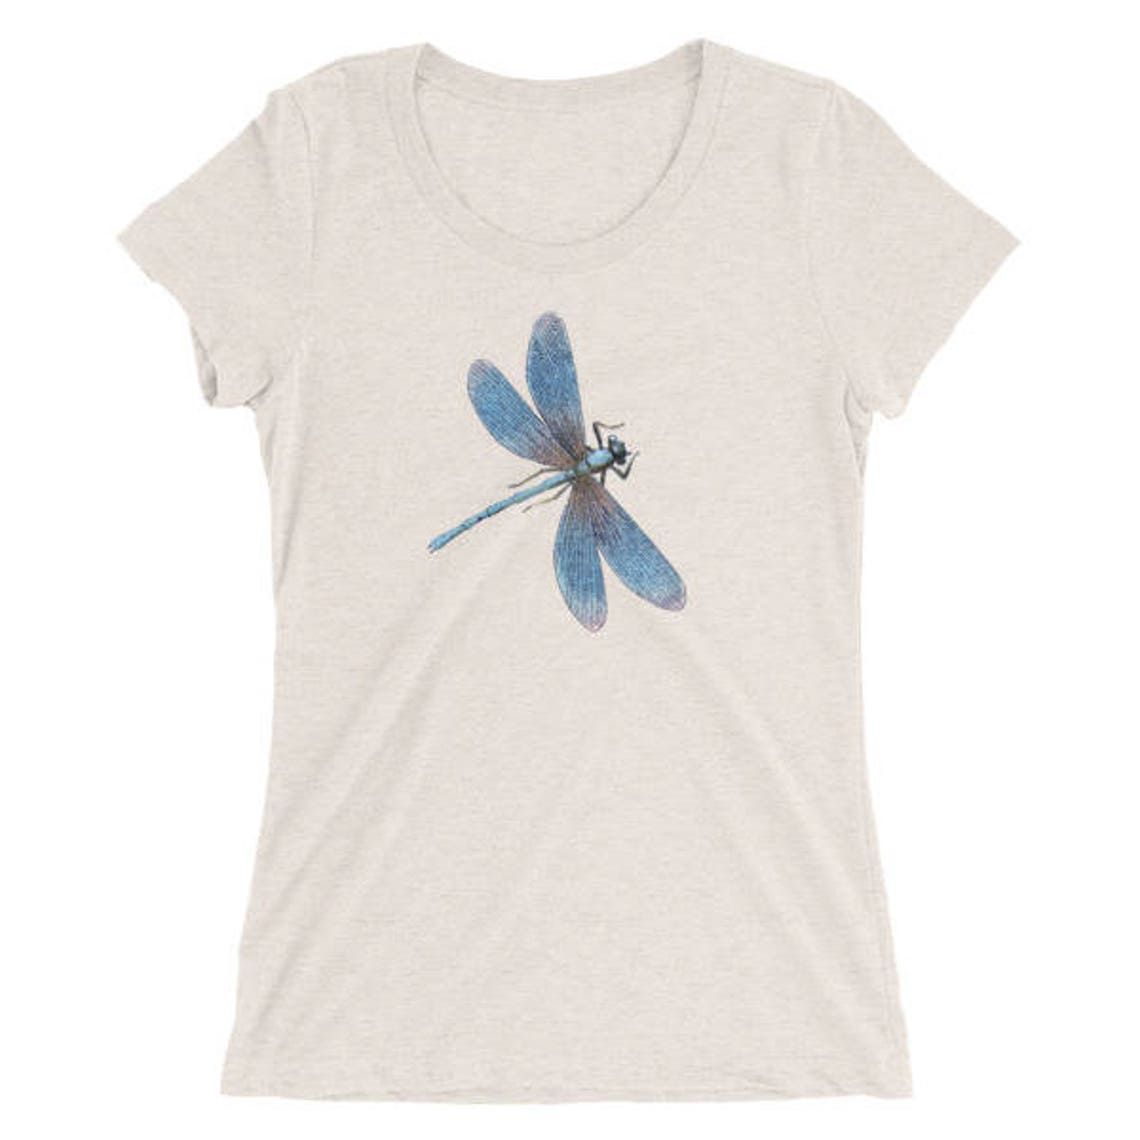 Ladies' short sleeve t-shirt Dragonfly t shirt Gift for | Etsy